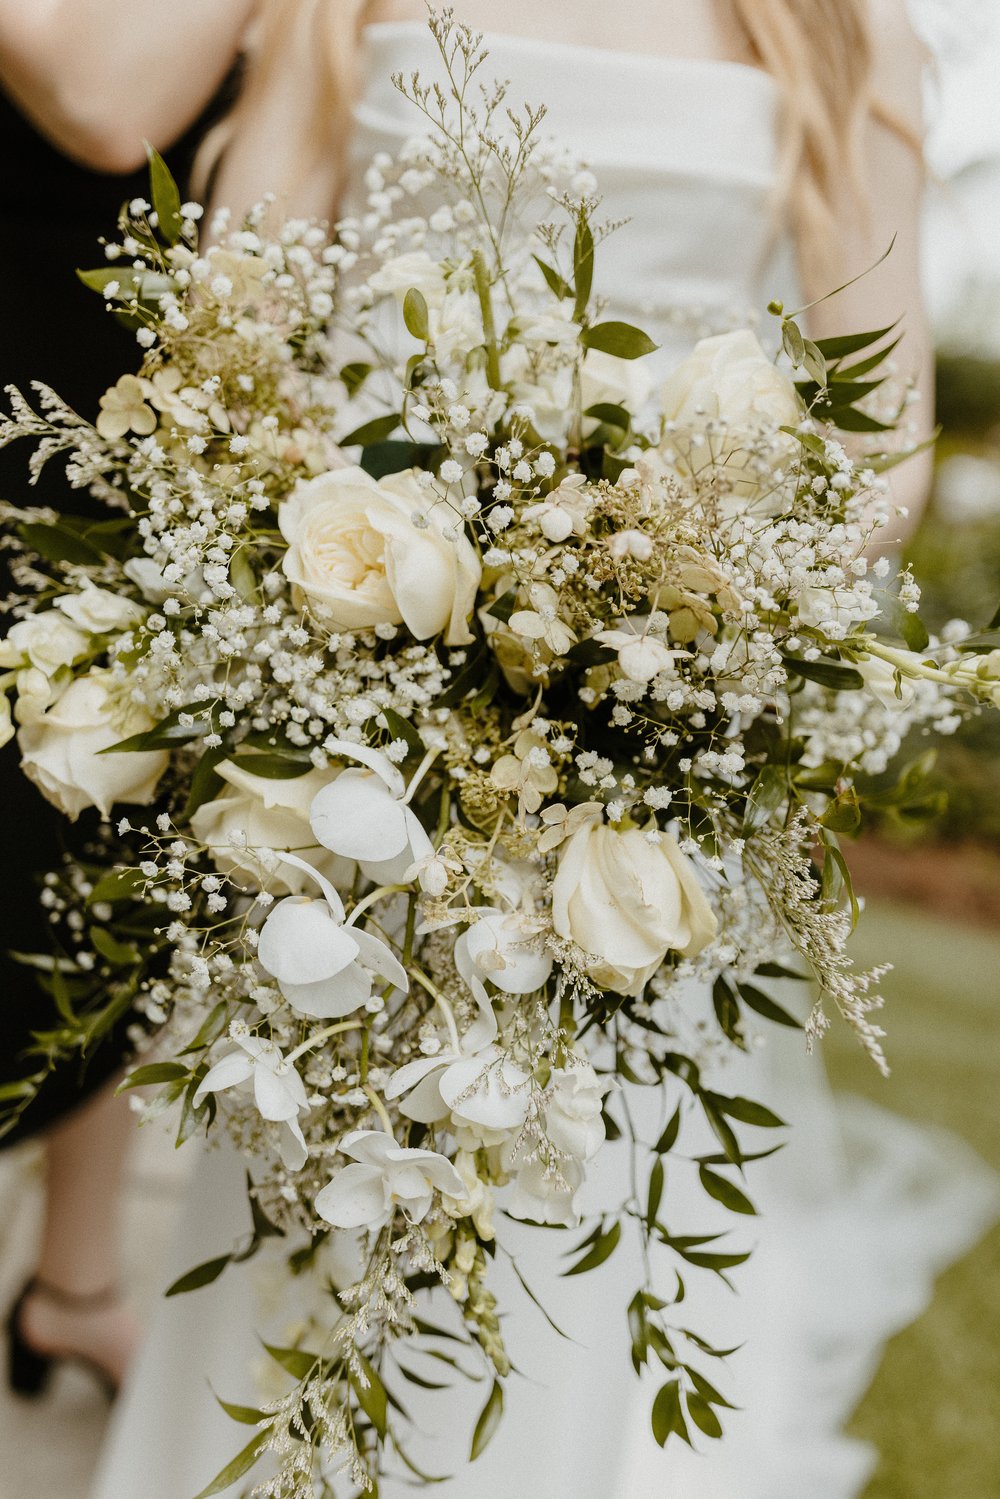 bridal bouquet with white roses, baby's breath, and greenery